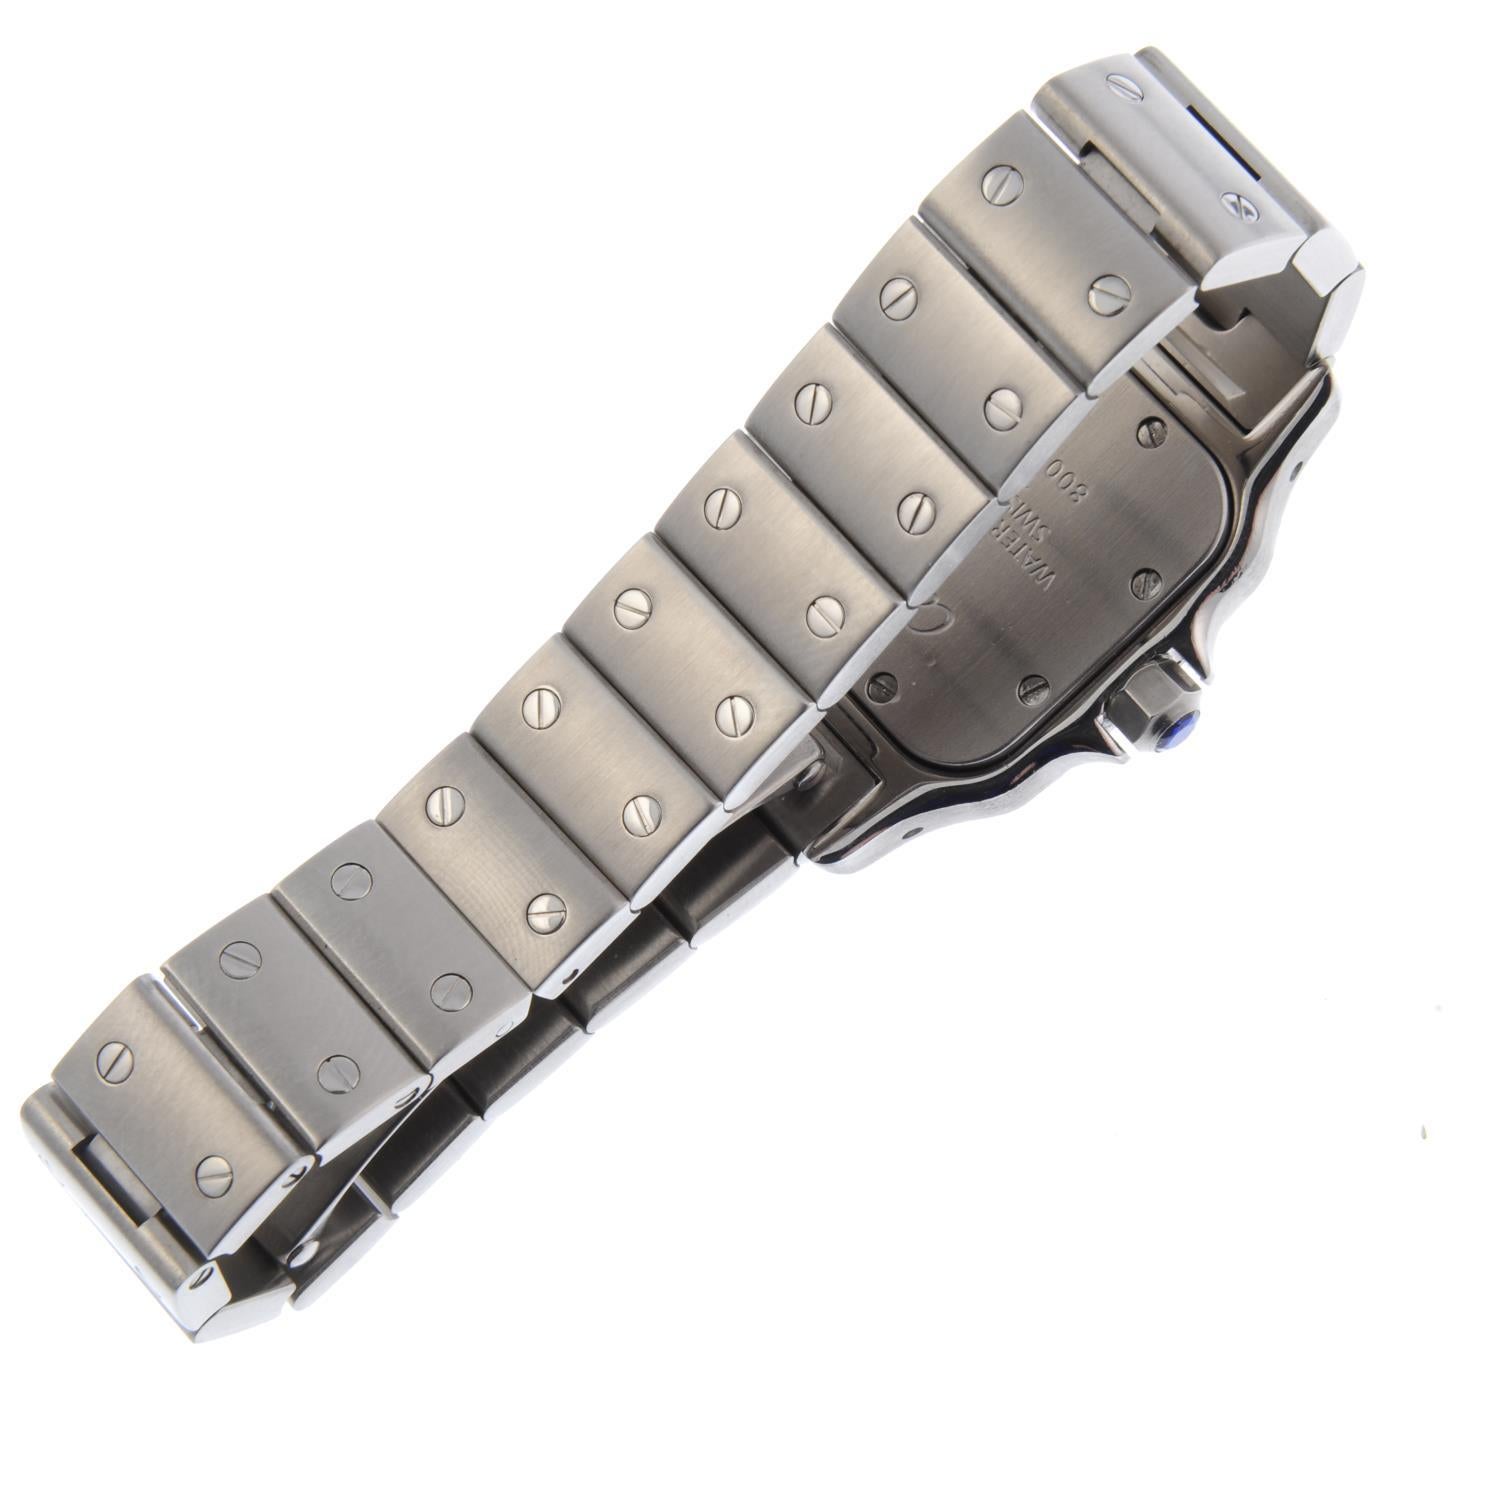 BERNARDO ANTICHITÀ PONTE VECCHIO FLORENCE

Serial 800723CE. Signed quartz calibre 157. Silvered dial with Roman numeral hour markers. Fitted to a signed stainless steel bracelet with double folding clasp. 24mm.